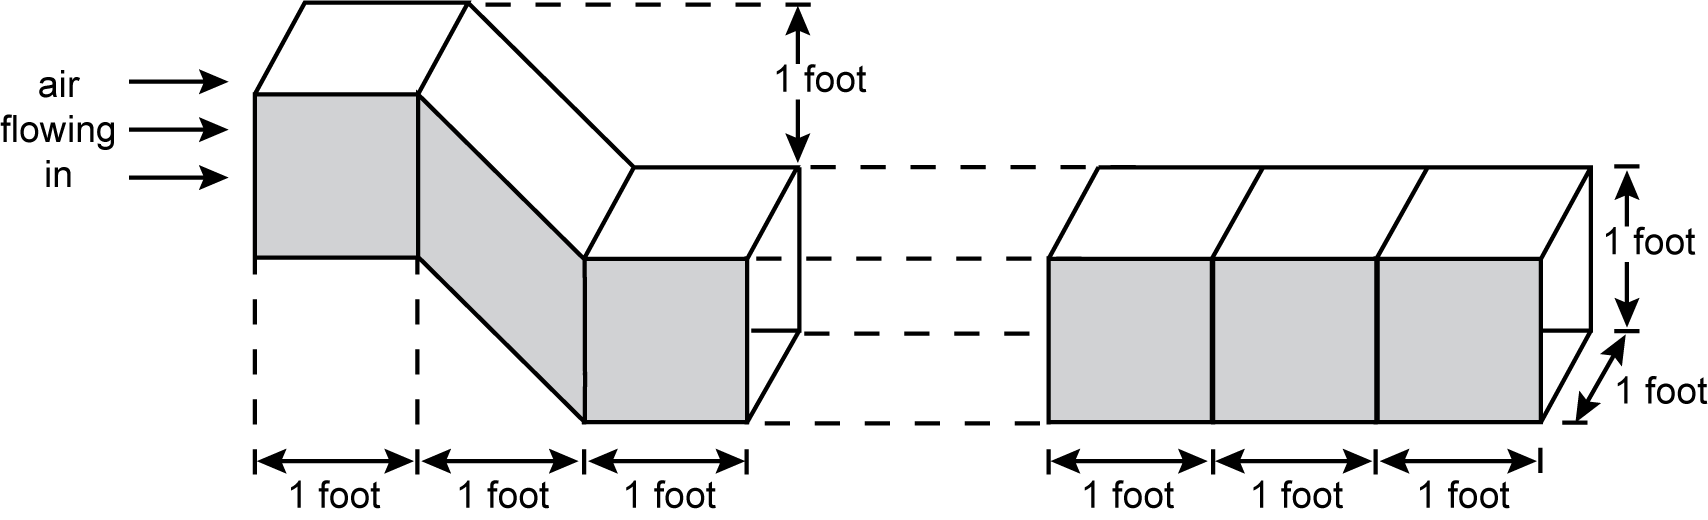 Two segments of air ducts are shown in a horizontal arrangement.